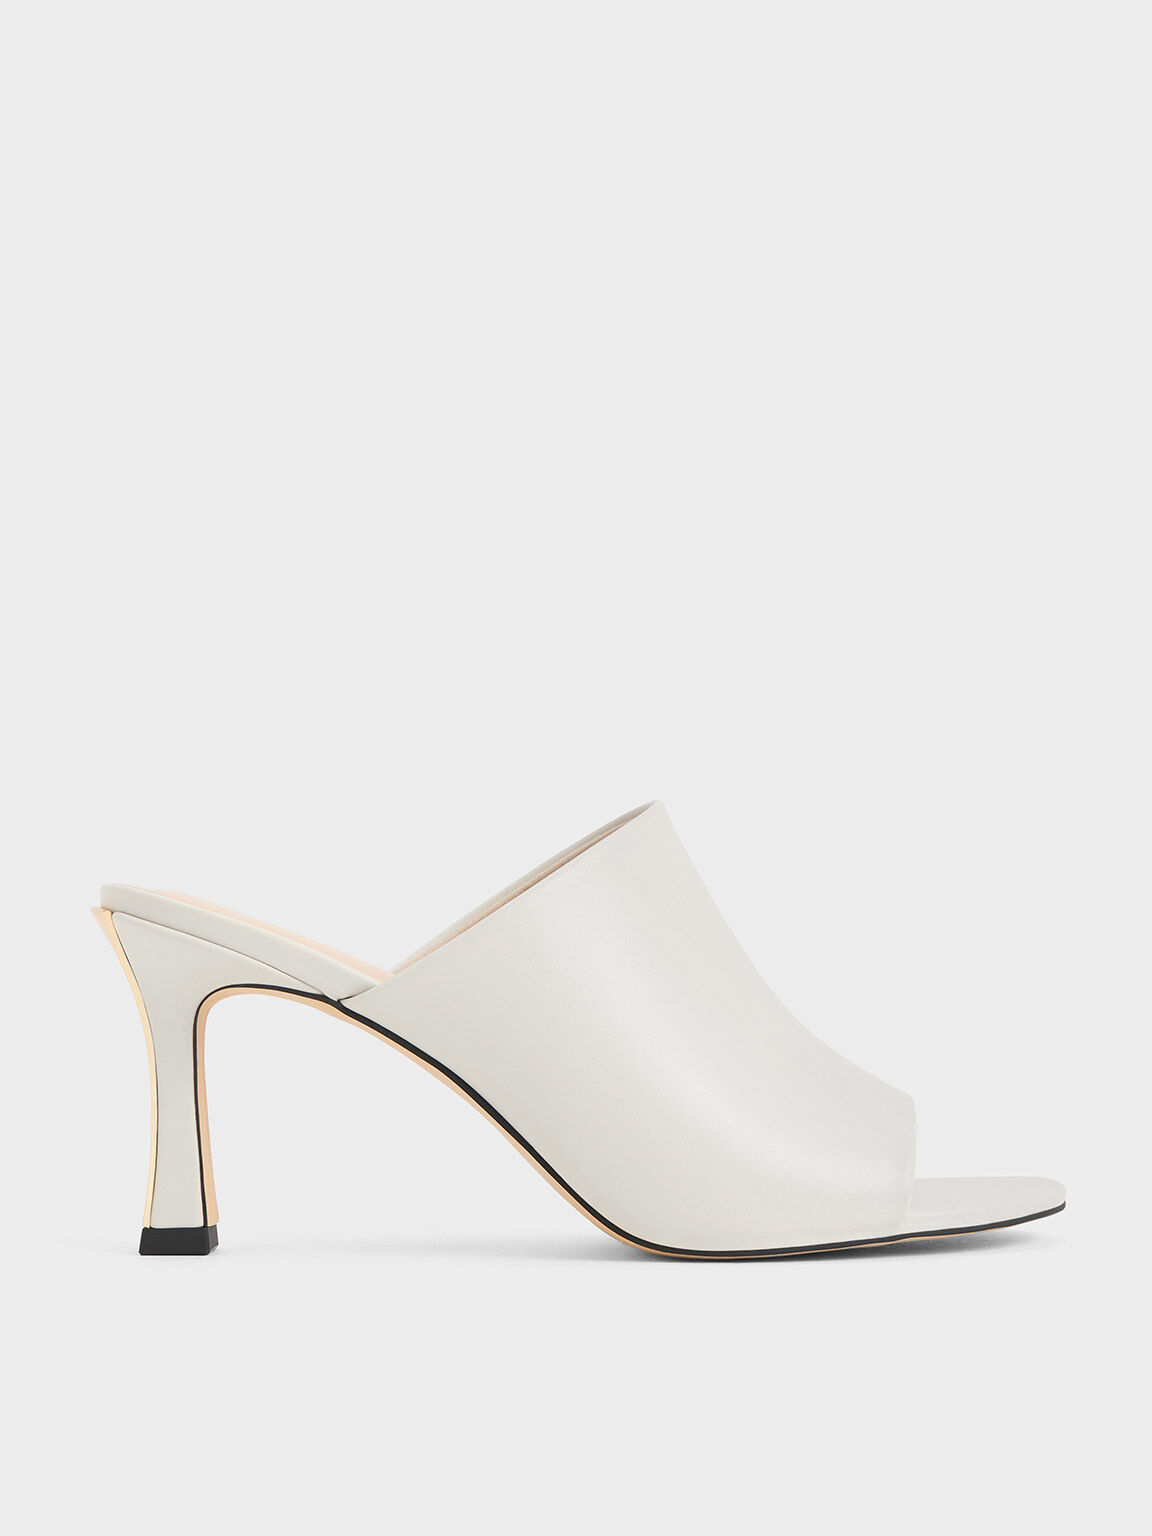 Women's Shoes | Shop Exclusive Styles | CHARLES & KEITH AU